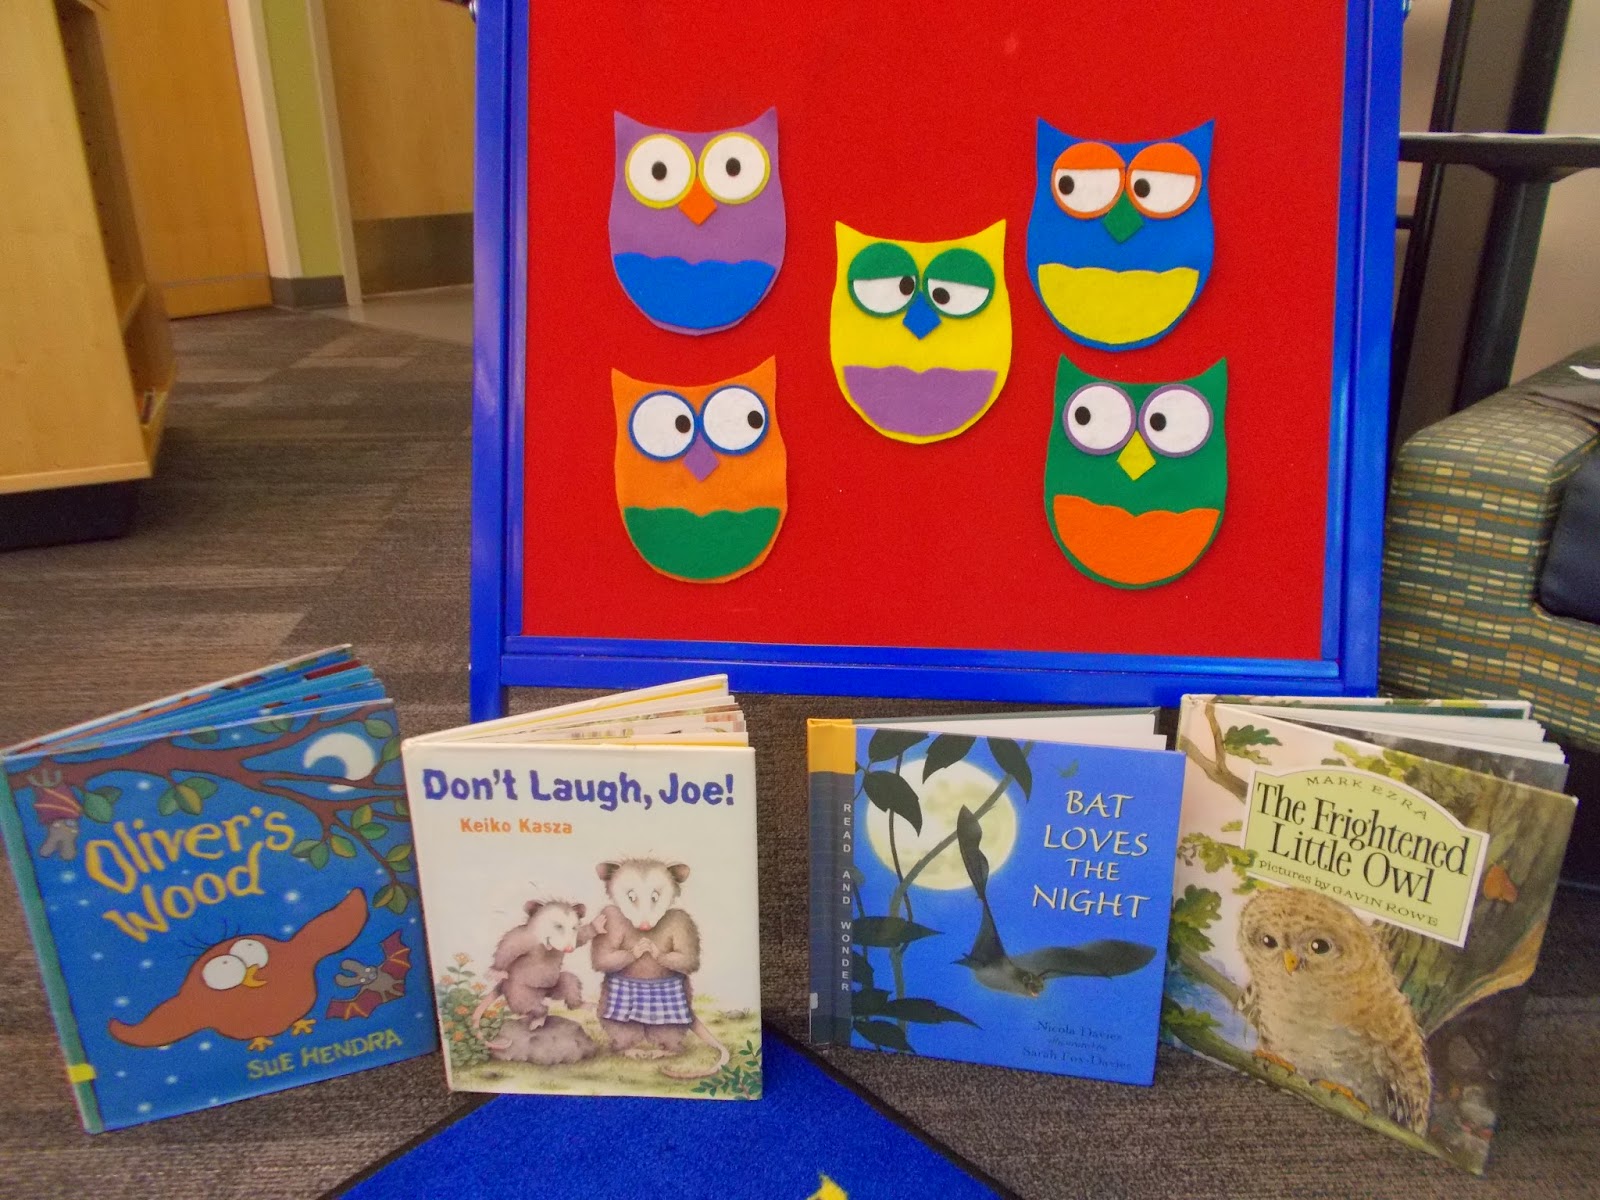 Fun with Friends at Storytime: Nocturnal Animals